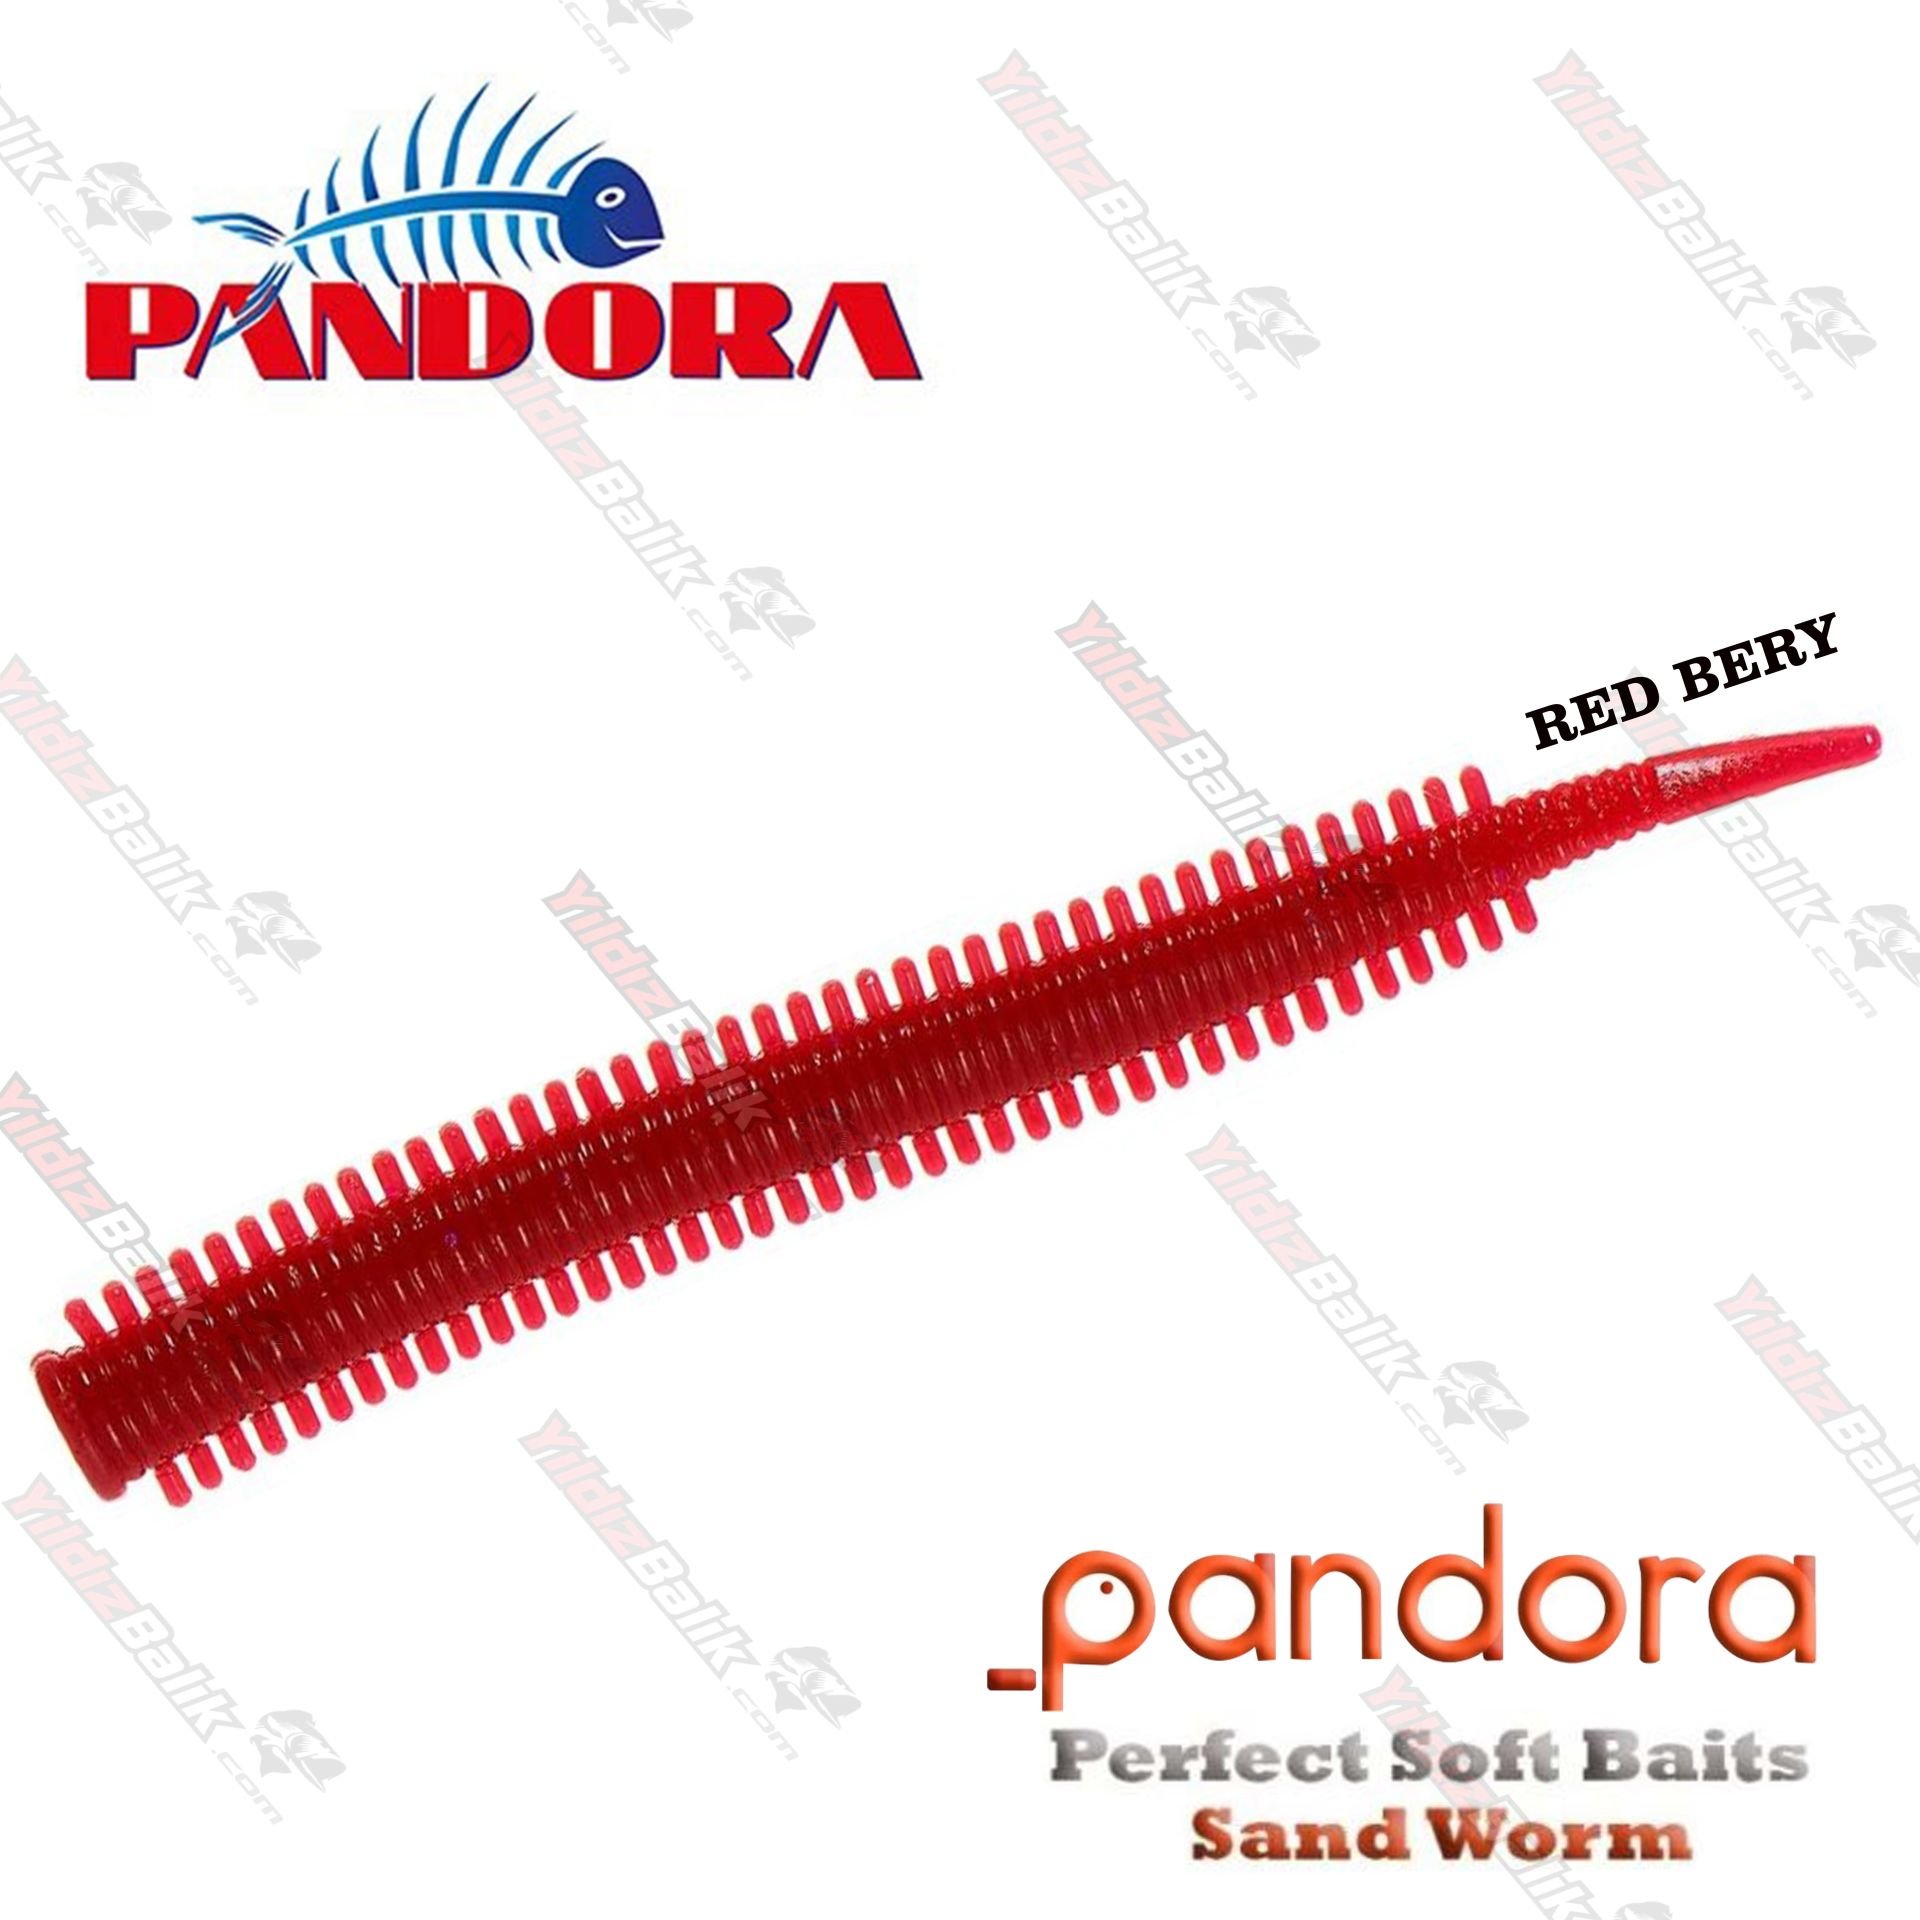 https://ideacdn.net/idea/as/57/myassets/products/794/pandora-perfect-soft-baits-sandworm-red-bery.jpg?revision=1697143329